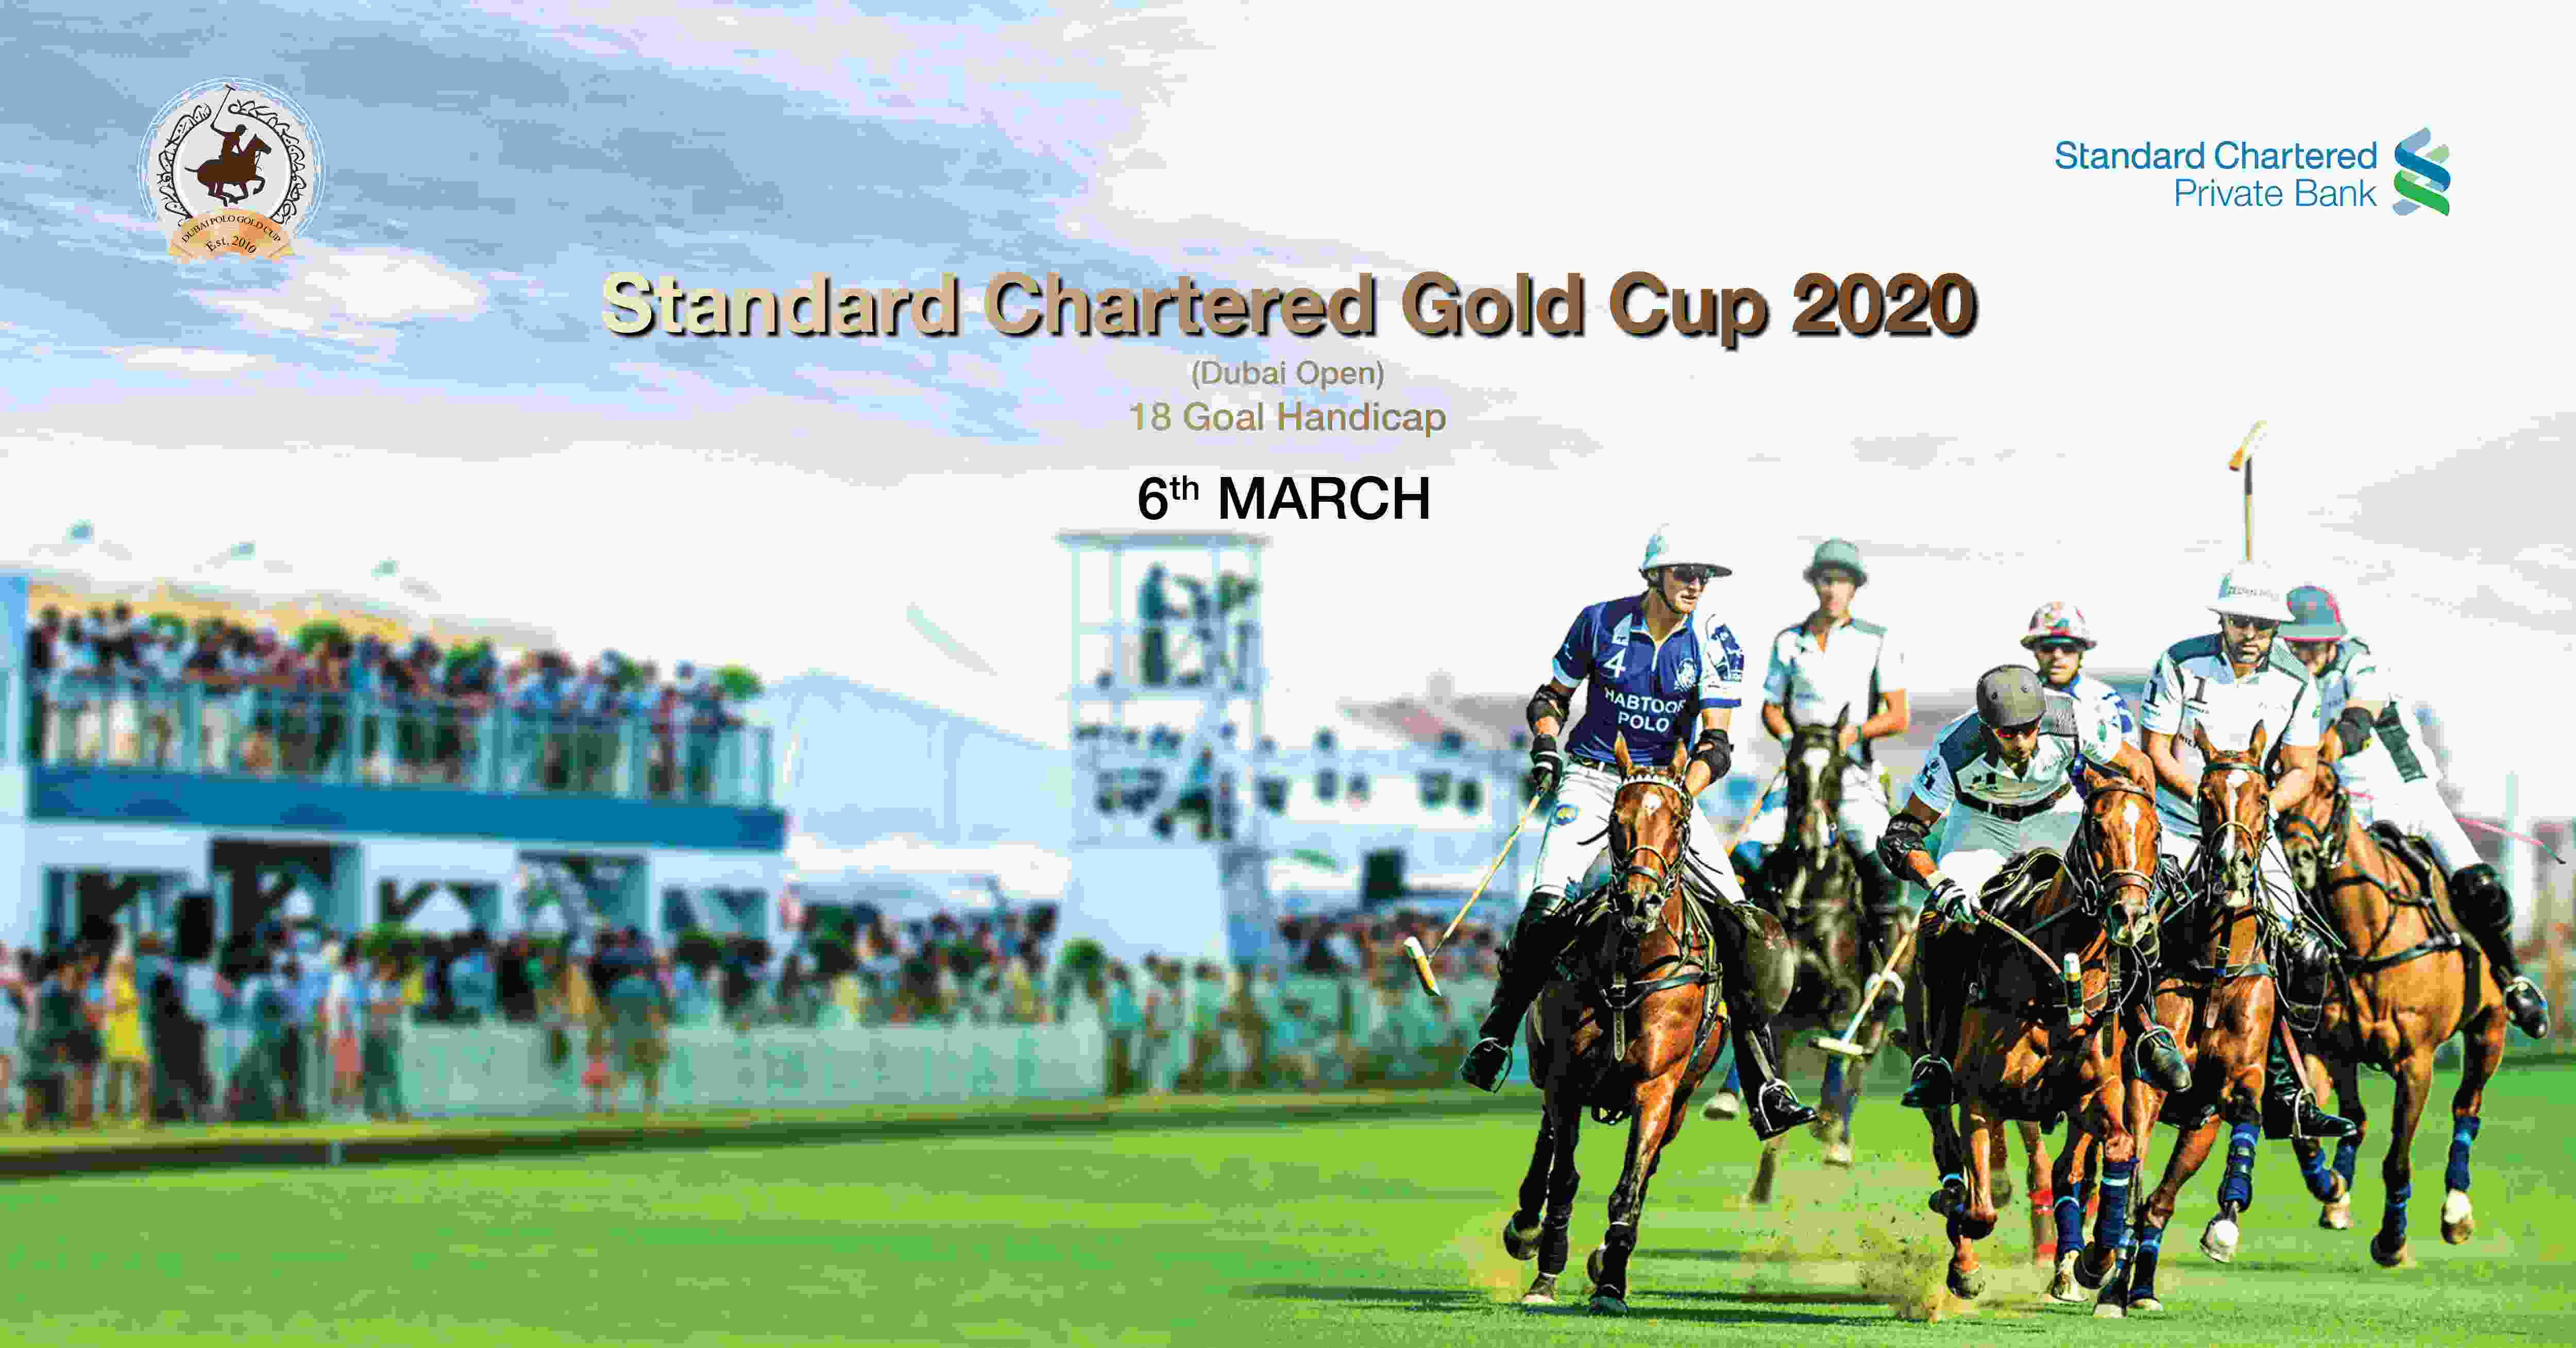 Standard Chartered Gold Cup 2020